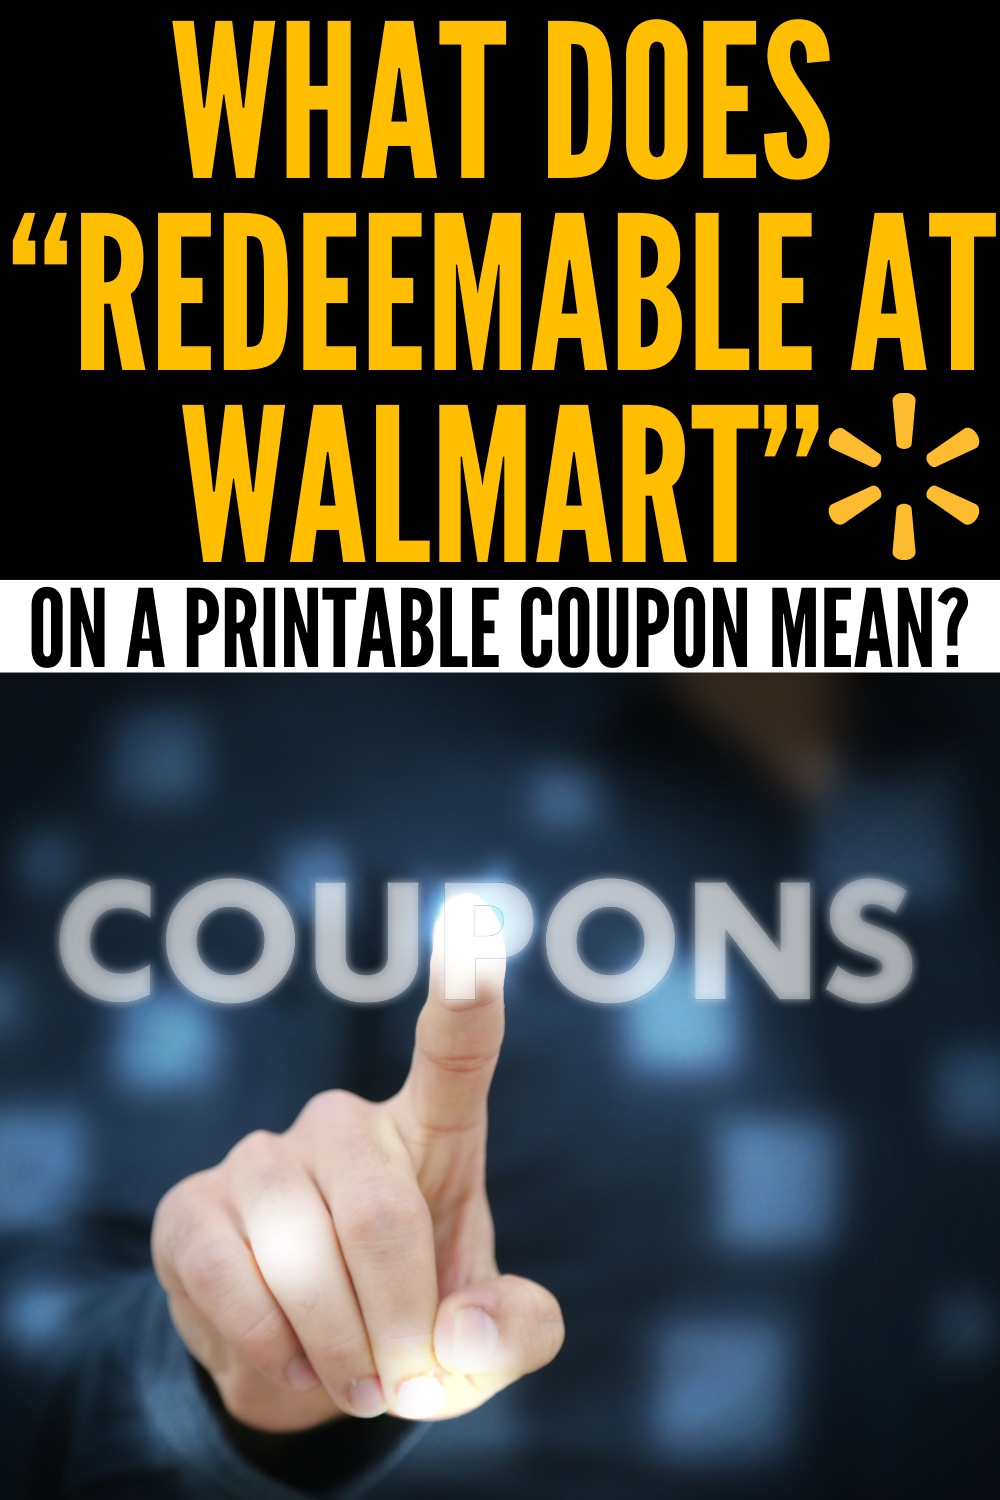 What Does “Redeemable at Walmart” on a Printable Coupon Mean?